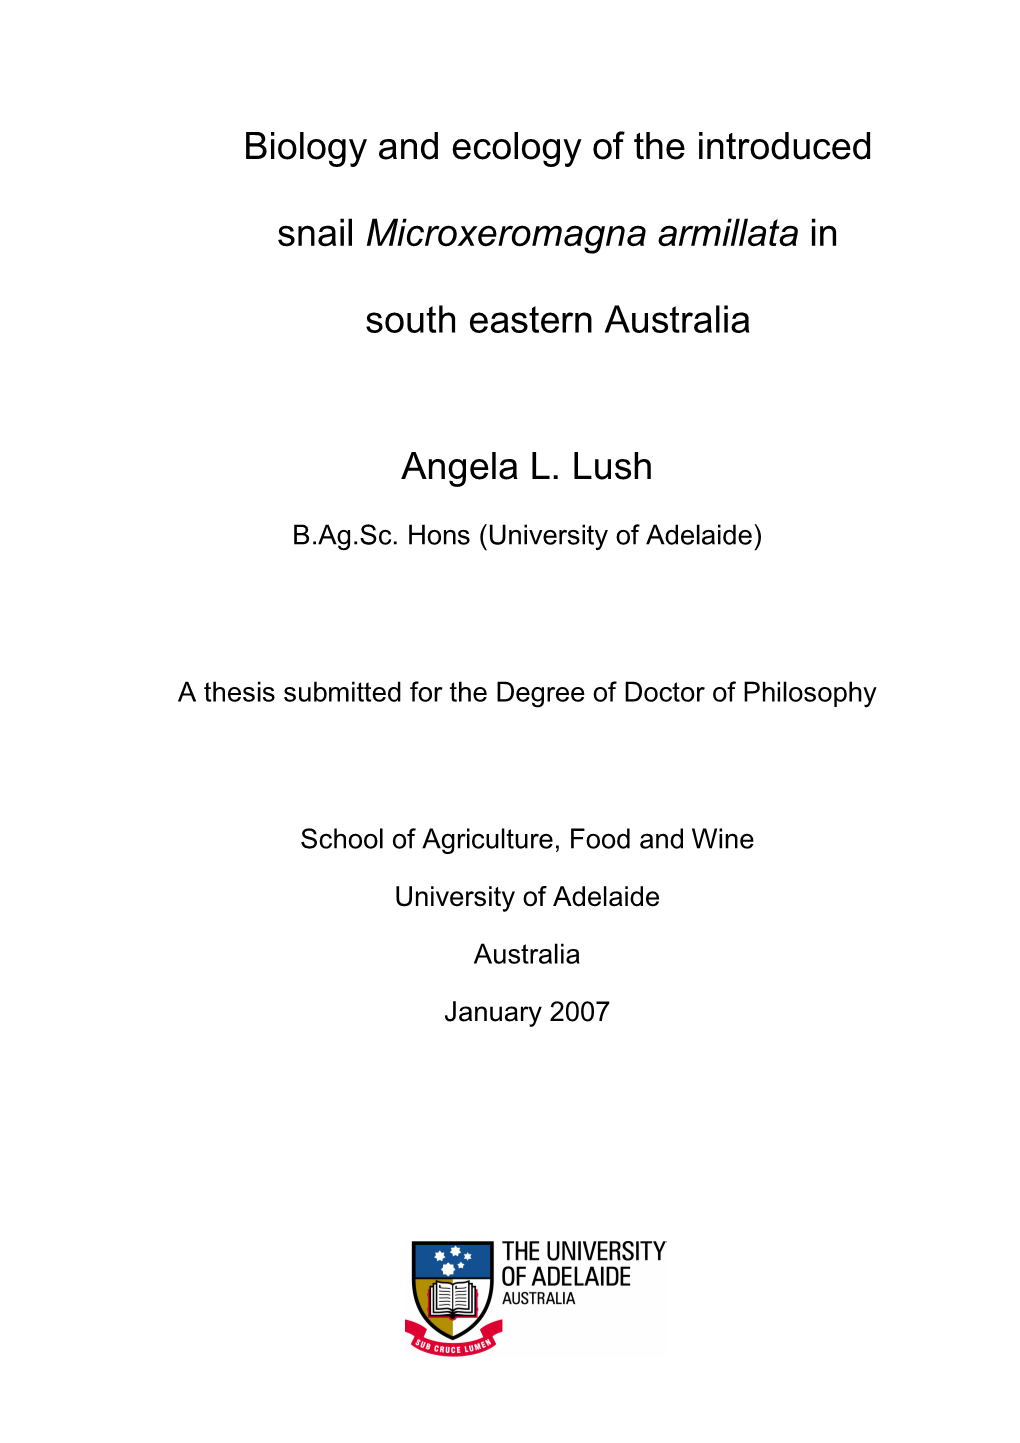 Biology and Ecology of the Introduced Snail Microxeromagna Armillata in South Eastern Australia